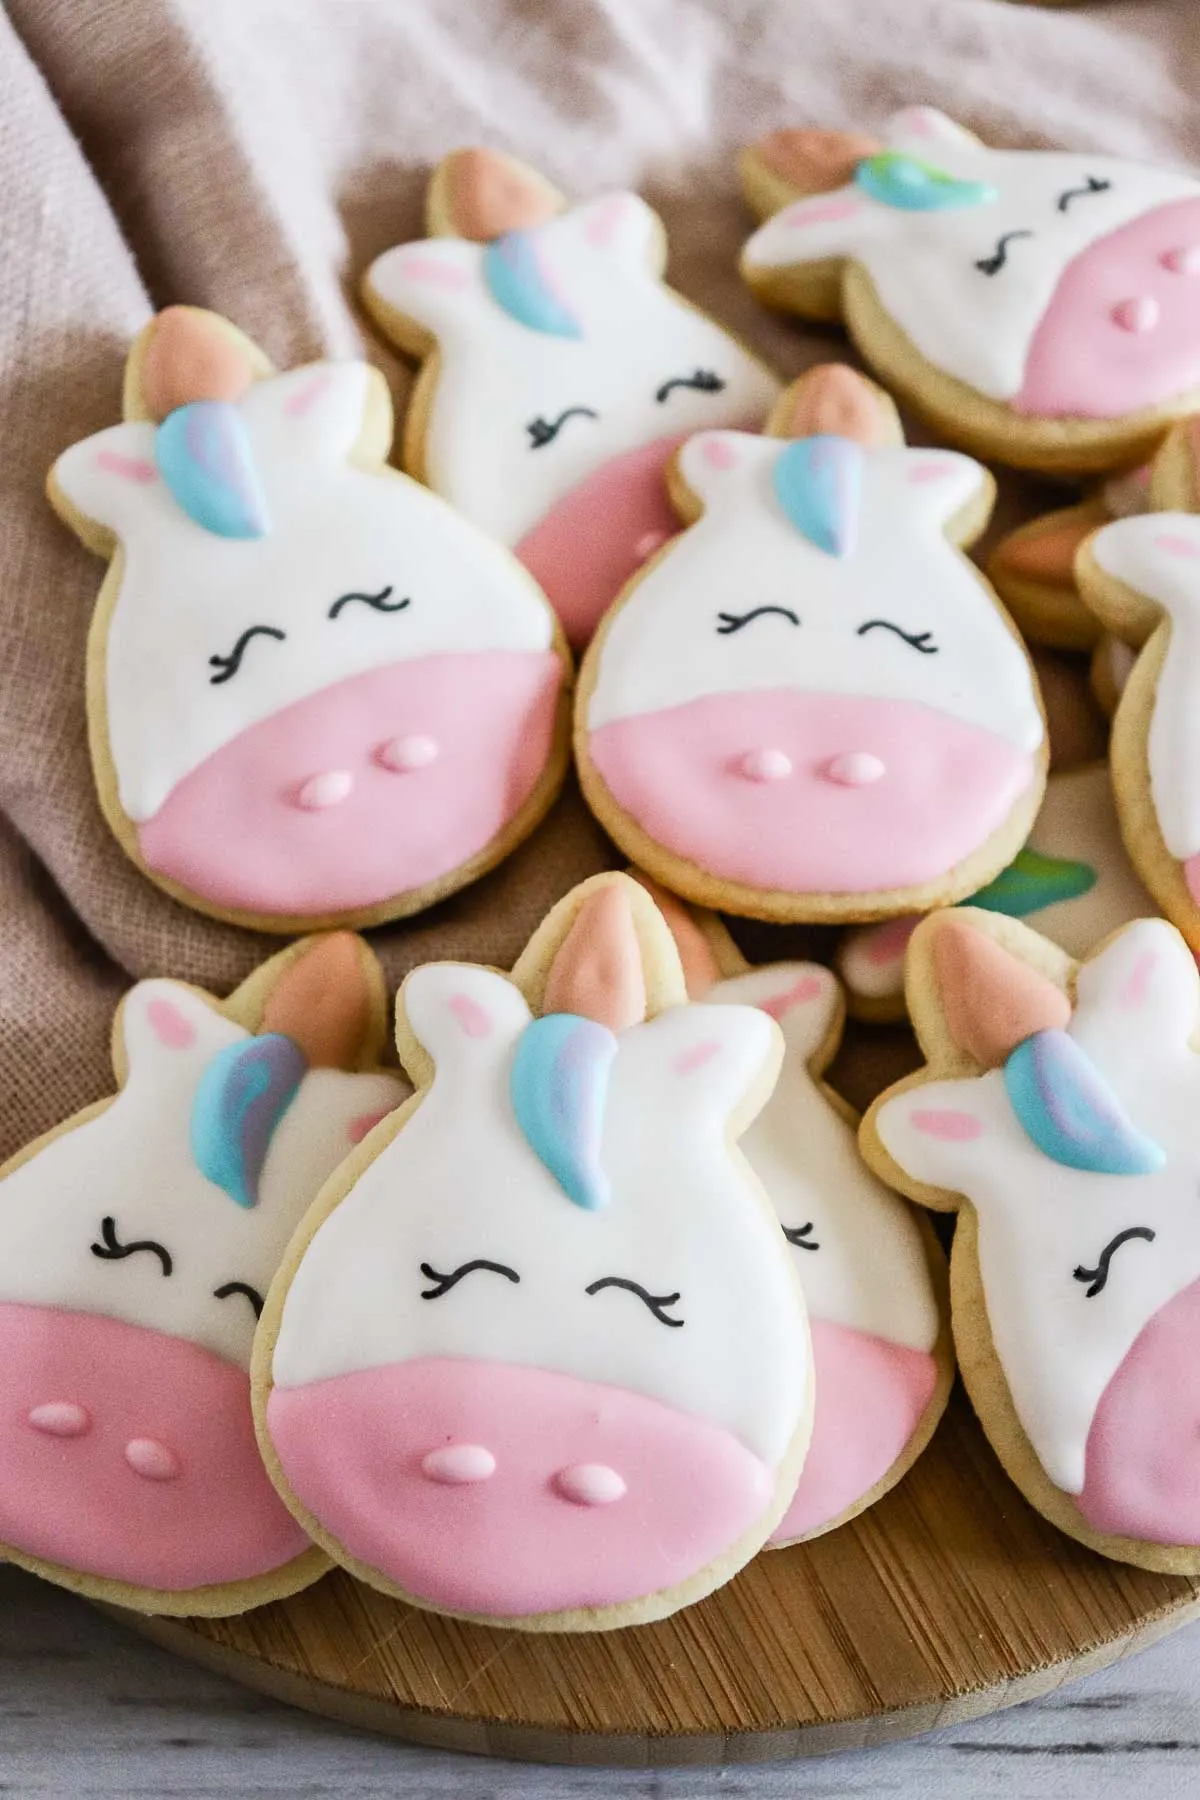 Learn how to make unicorn cookies with this sugar cookie decorating tutorial